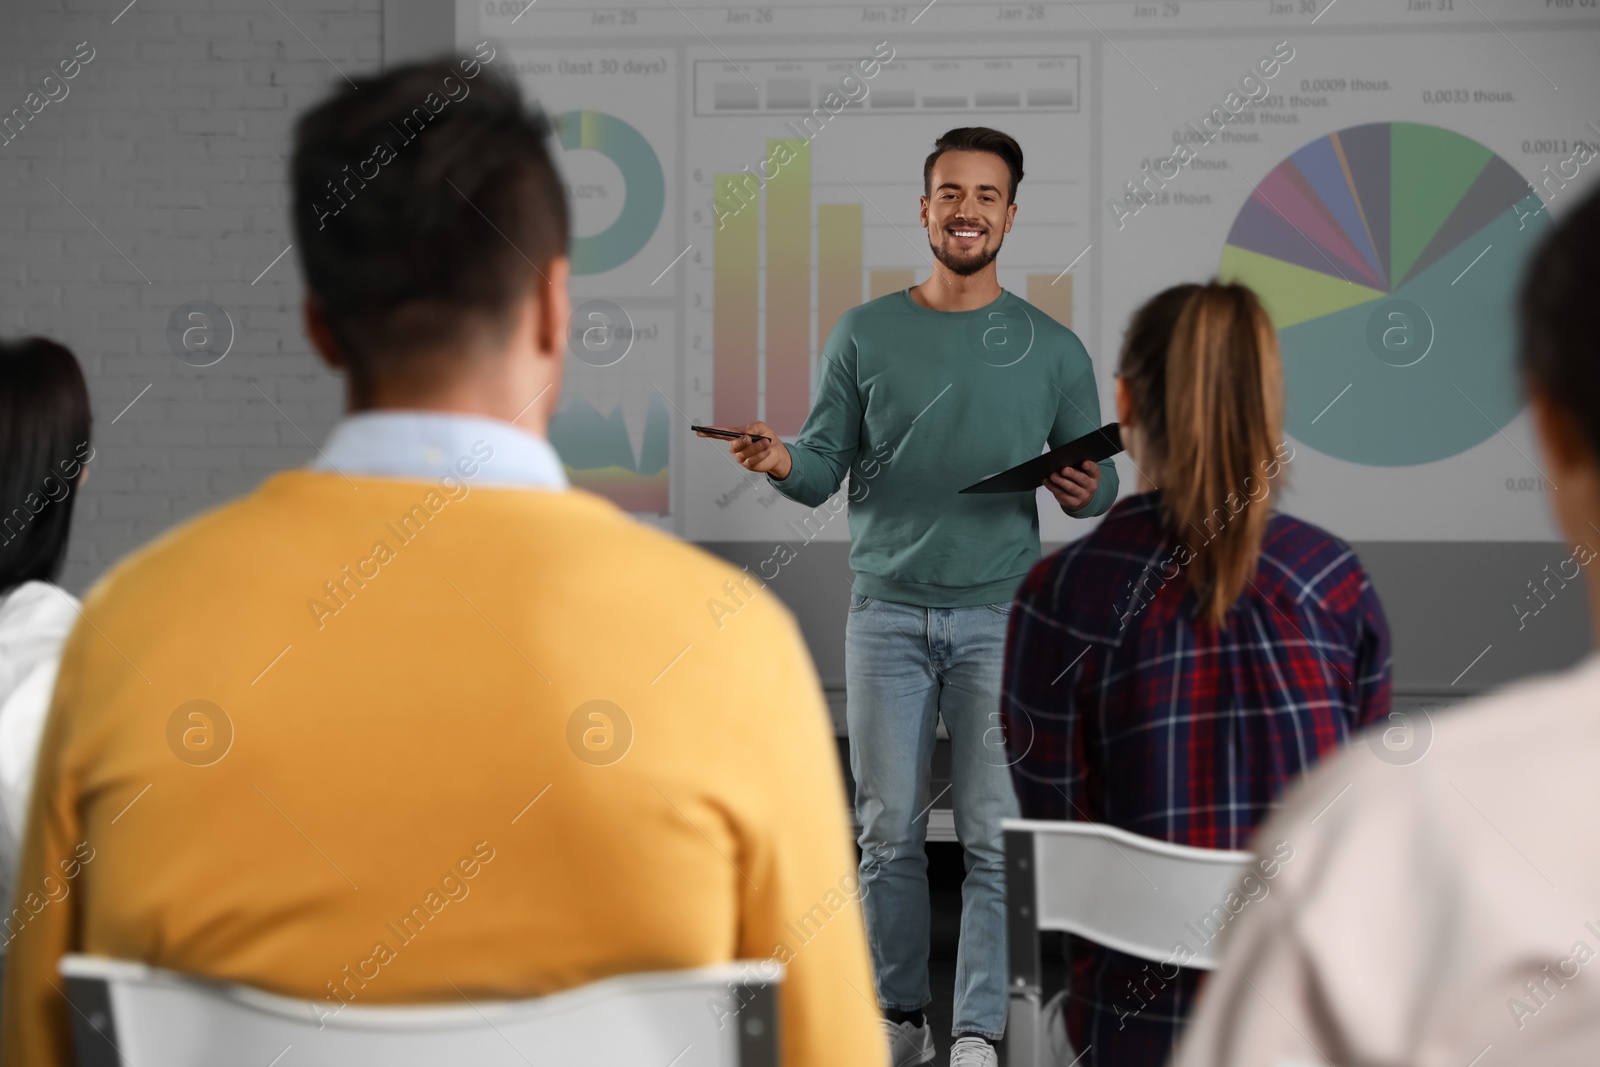 Photo of Male business trainer giving lecture in conference room with projection screen